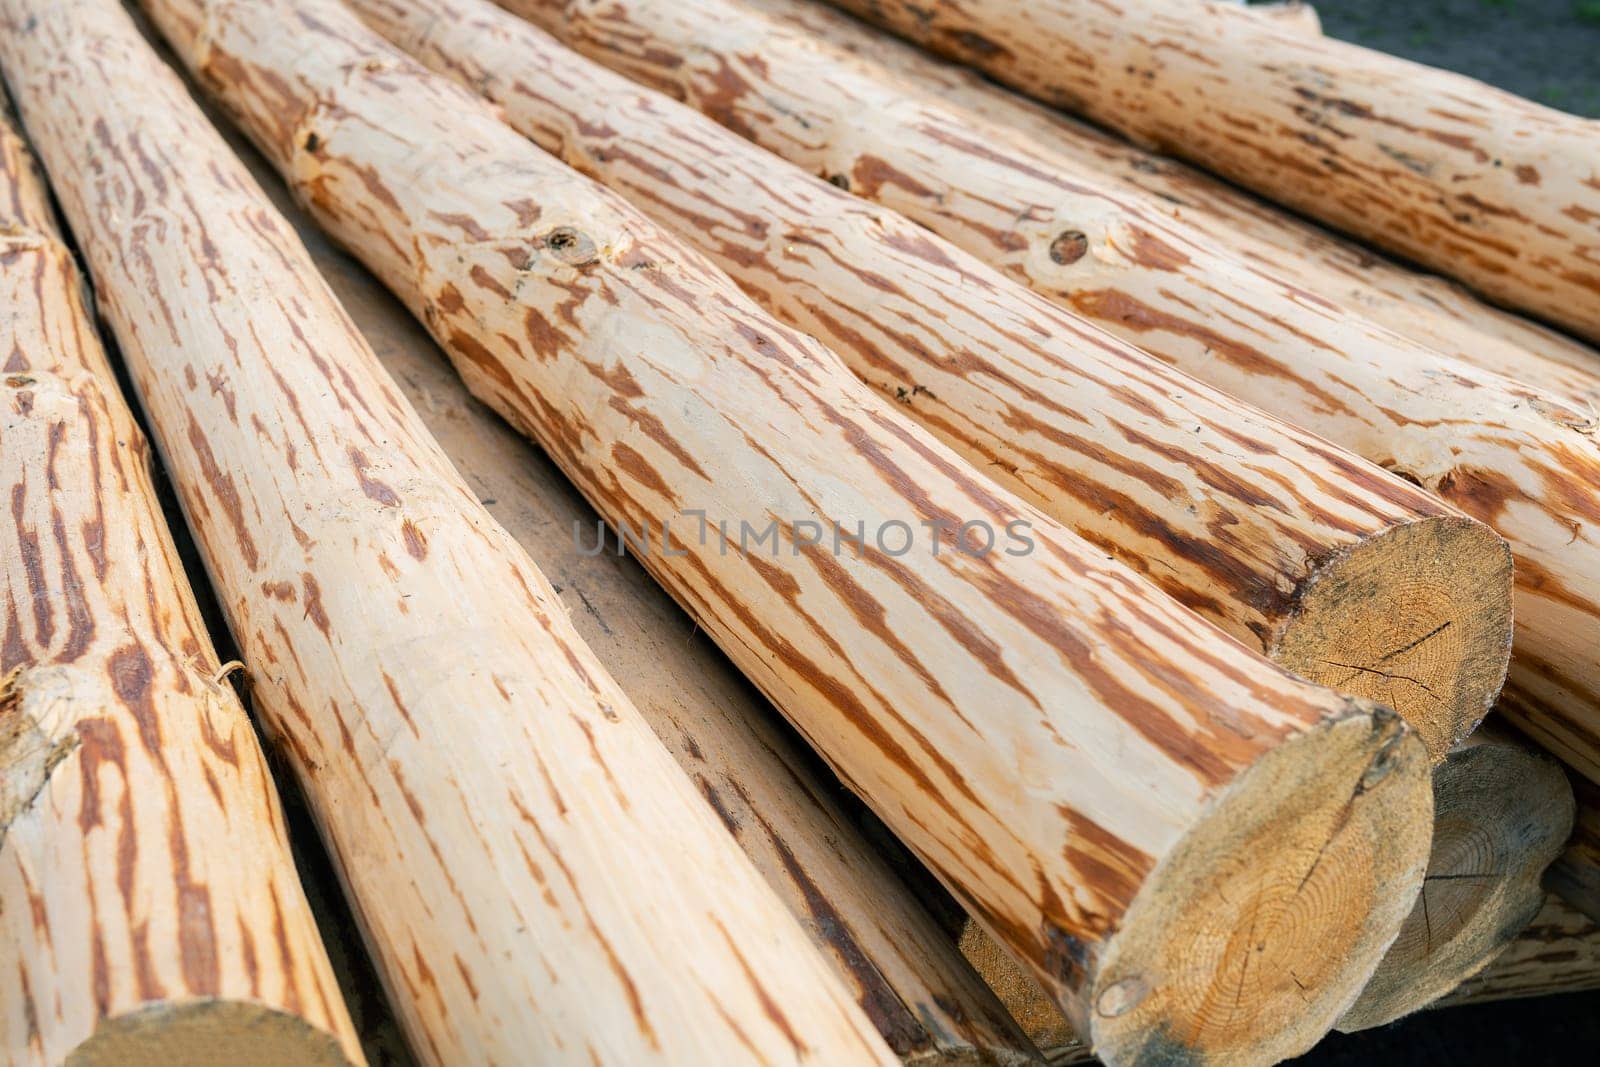 A close-up photograph of a pile of rough-textured wooden logs stacked on top of each other. Sawmill, agriculture. by sfinks